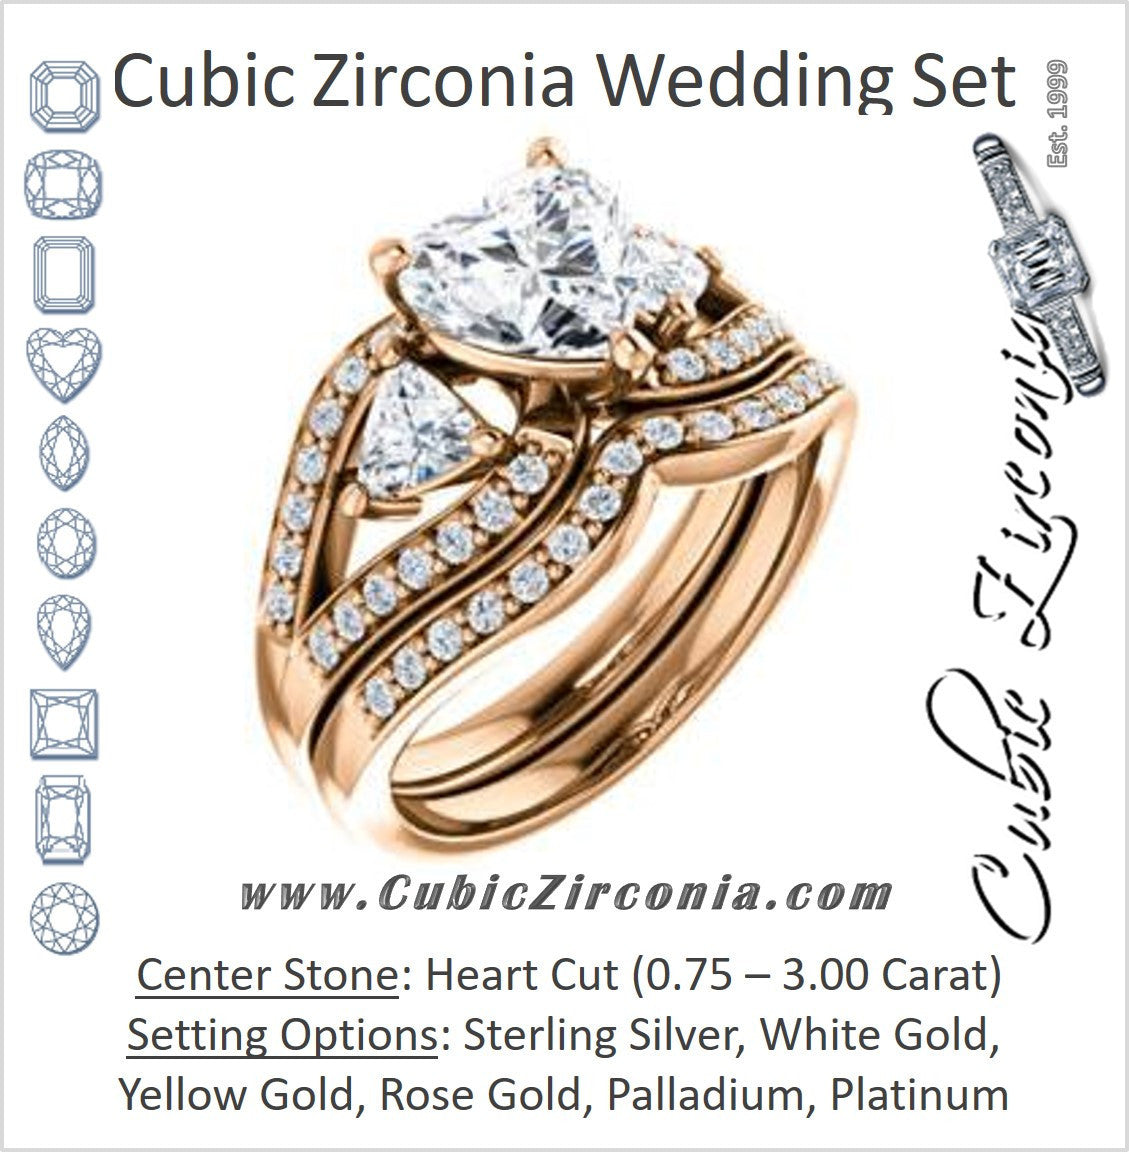 CZ Wedding Set, featuring The Karen engagement ring (Customizable Enhanced 3-stone Design with Heart Cut Center, Dual Trillion Accents and Wide Pavé-Split Band)